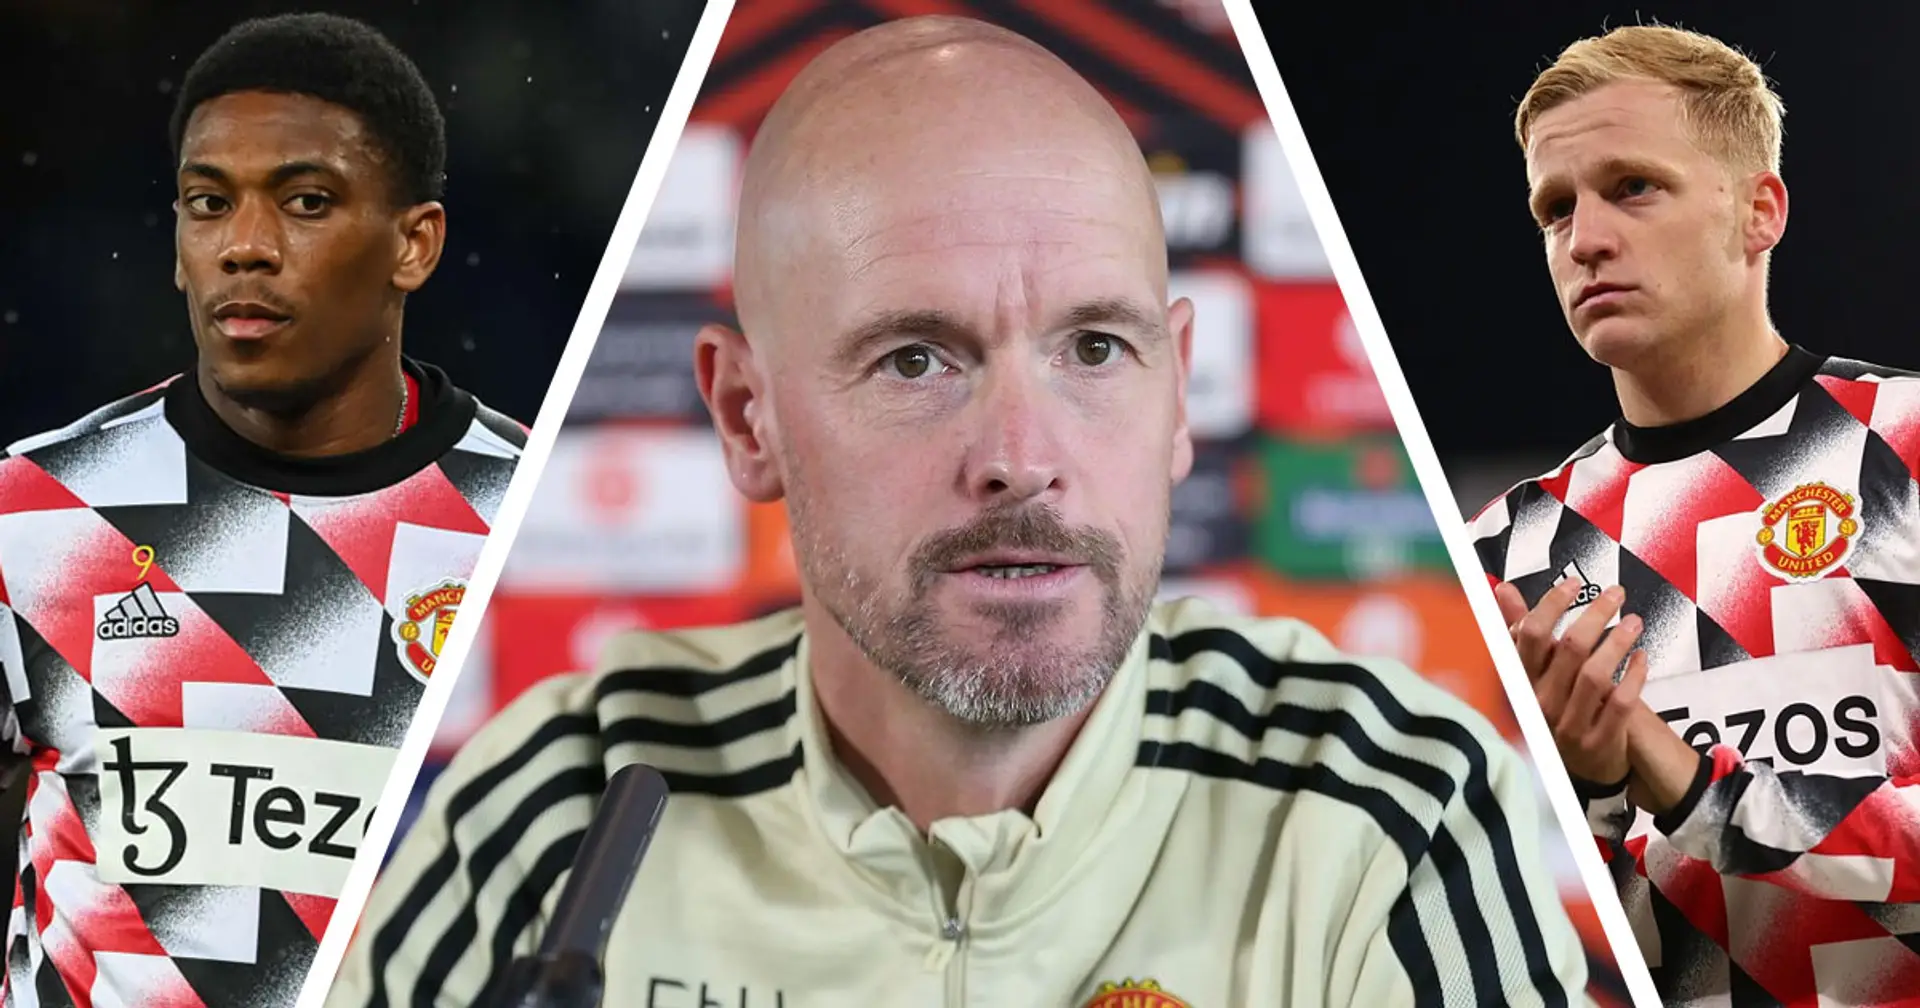 Ten Hag rules out Martial for Omonia Nicosia clash - gives worrying update on Van de Beek and Wan-Bissaka